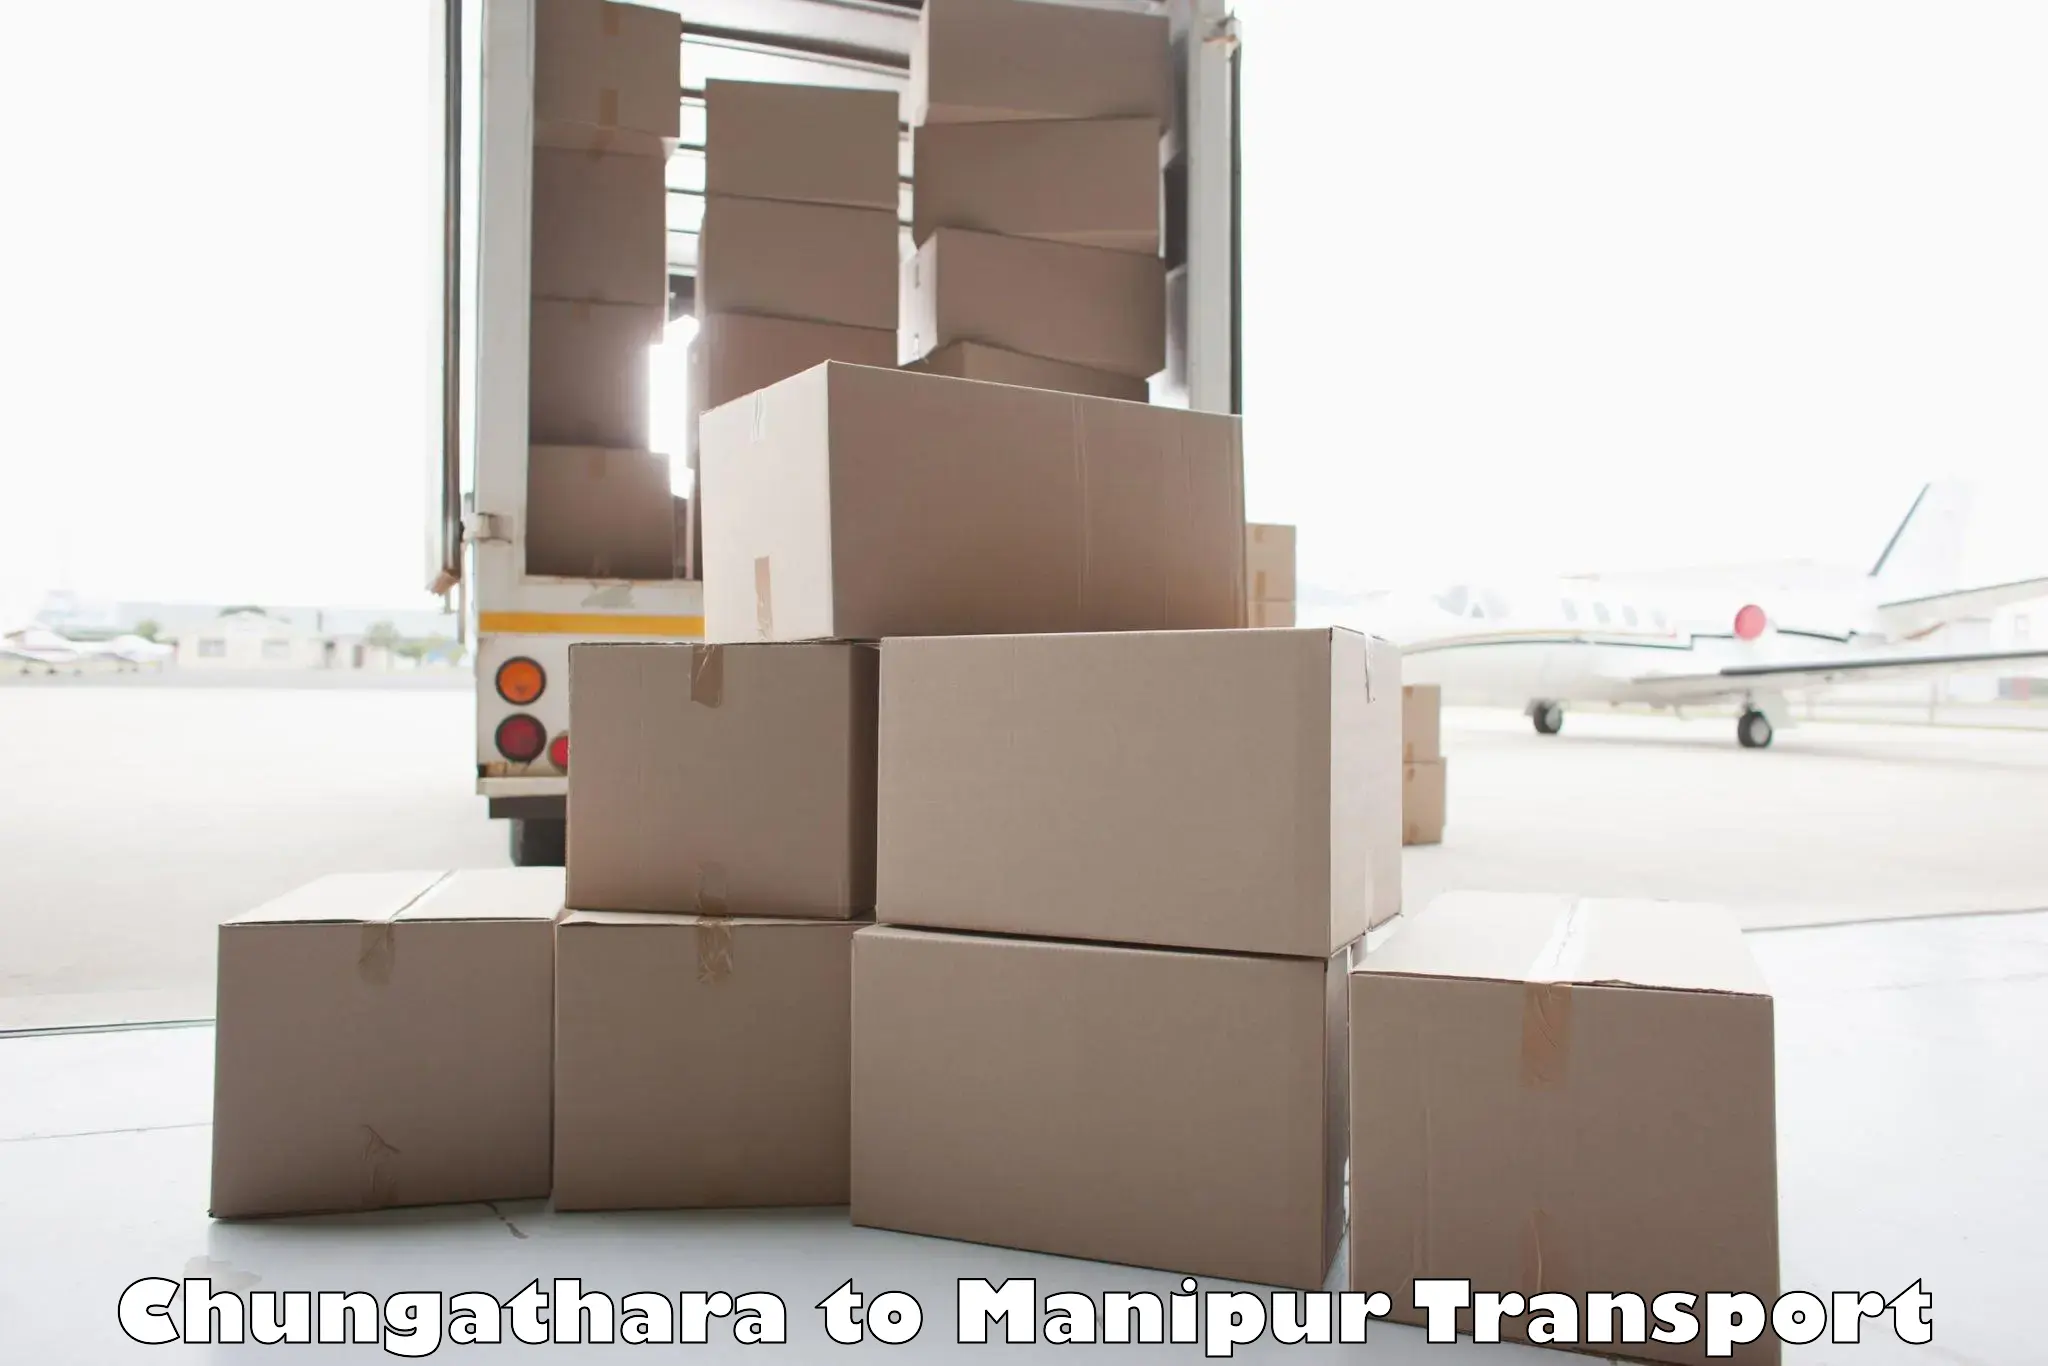 Part load transport service in India Chungathara to Manipur